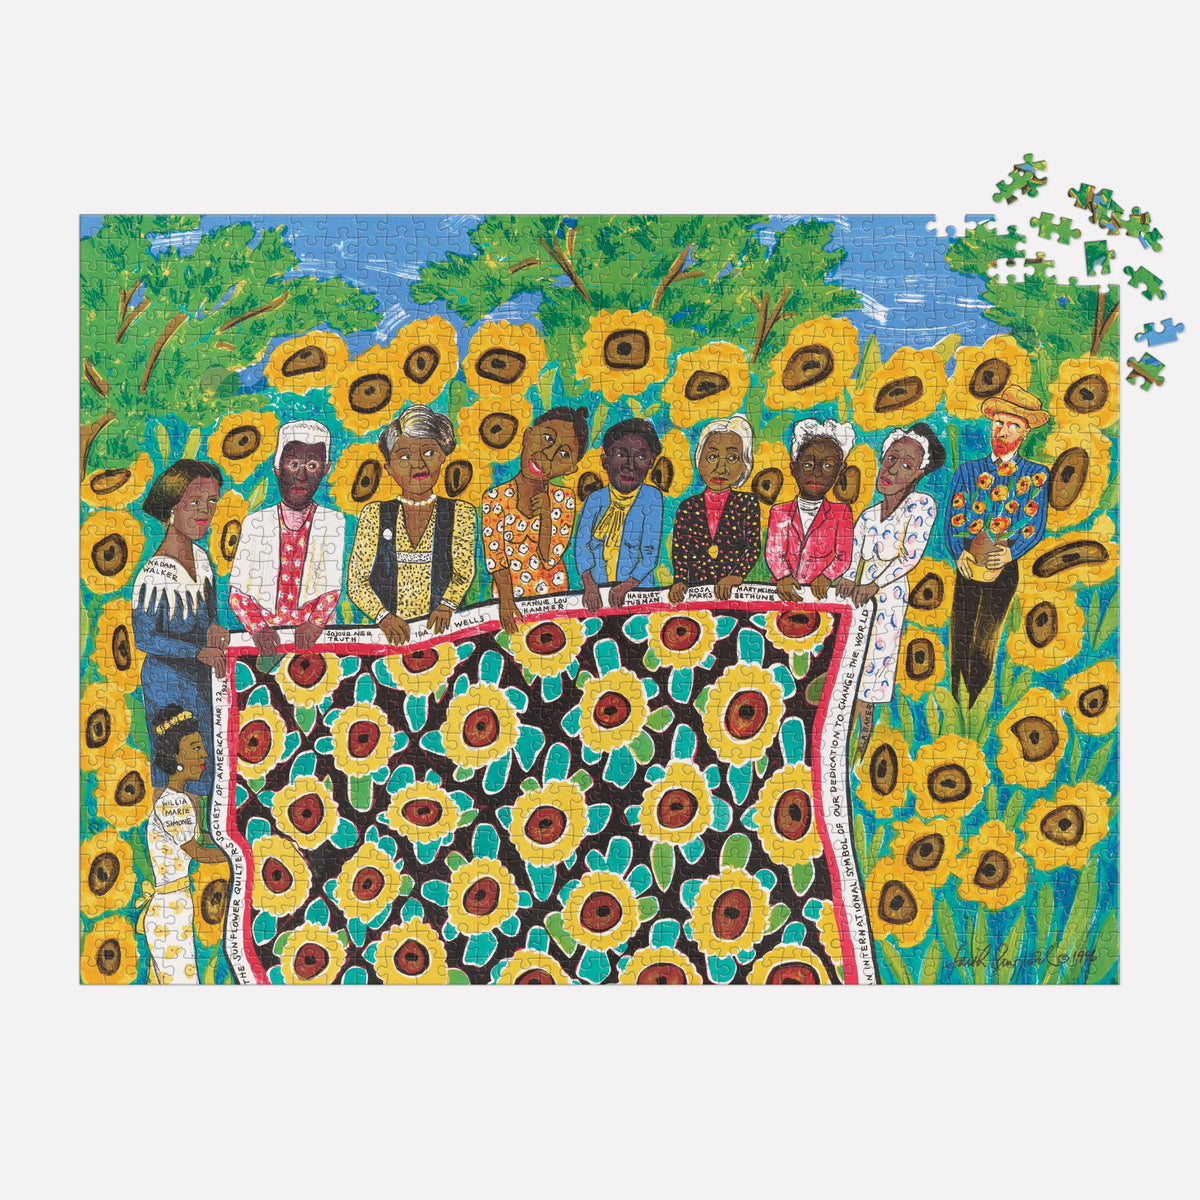 Faith Ringgold The Sunflower Quilting Bee at Arles 1000 Piece Jigsaw Puzzle 1000 Piece Puzzles Faith Ringgold 